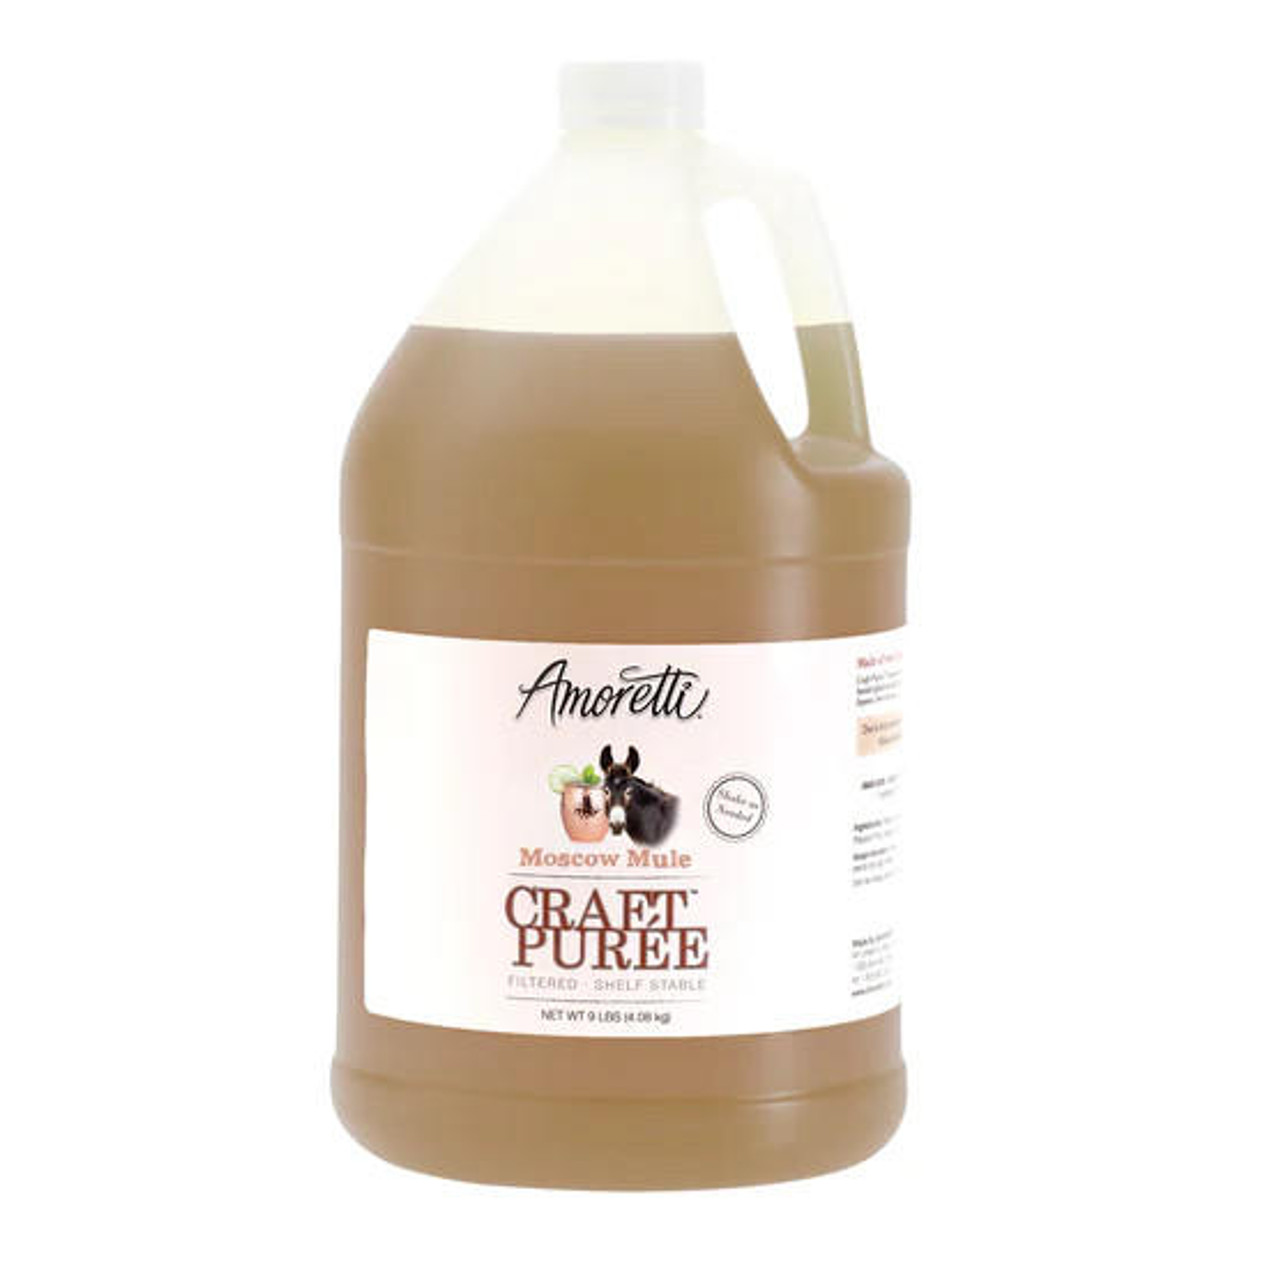 AMORETTI Amoretti Moscow Mule Craft Puree 1 Gallon with Zesty Lime 